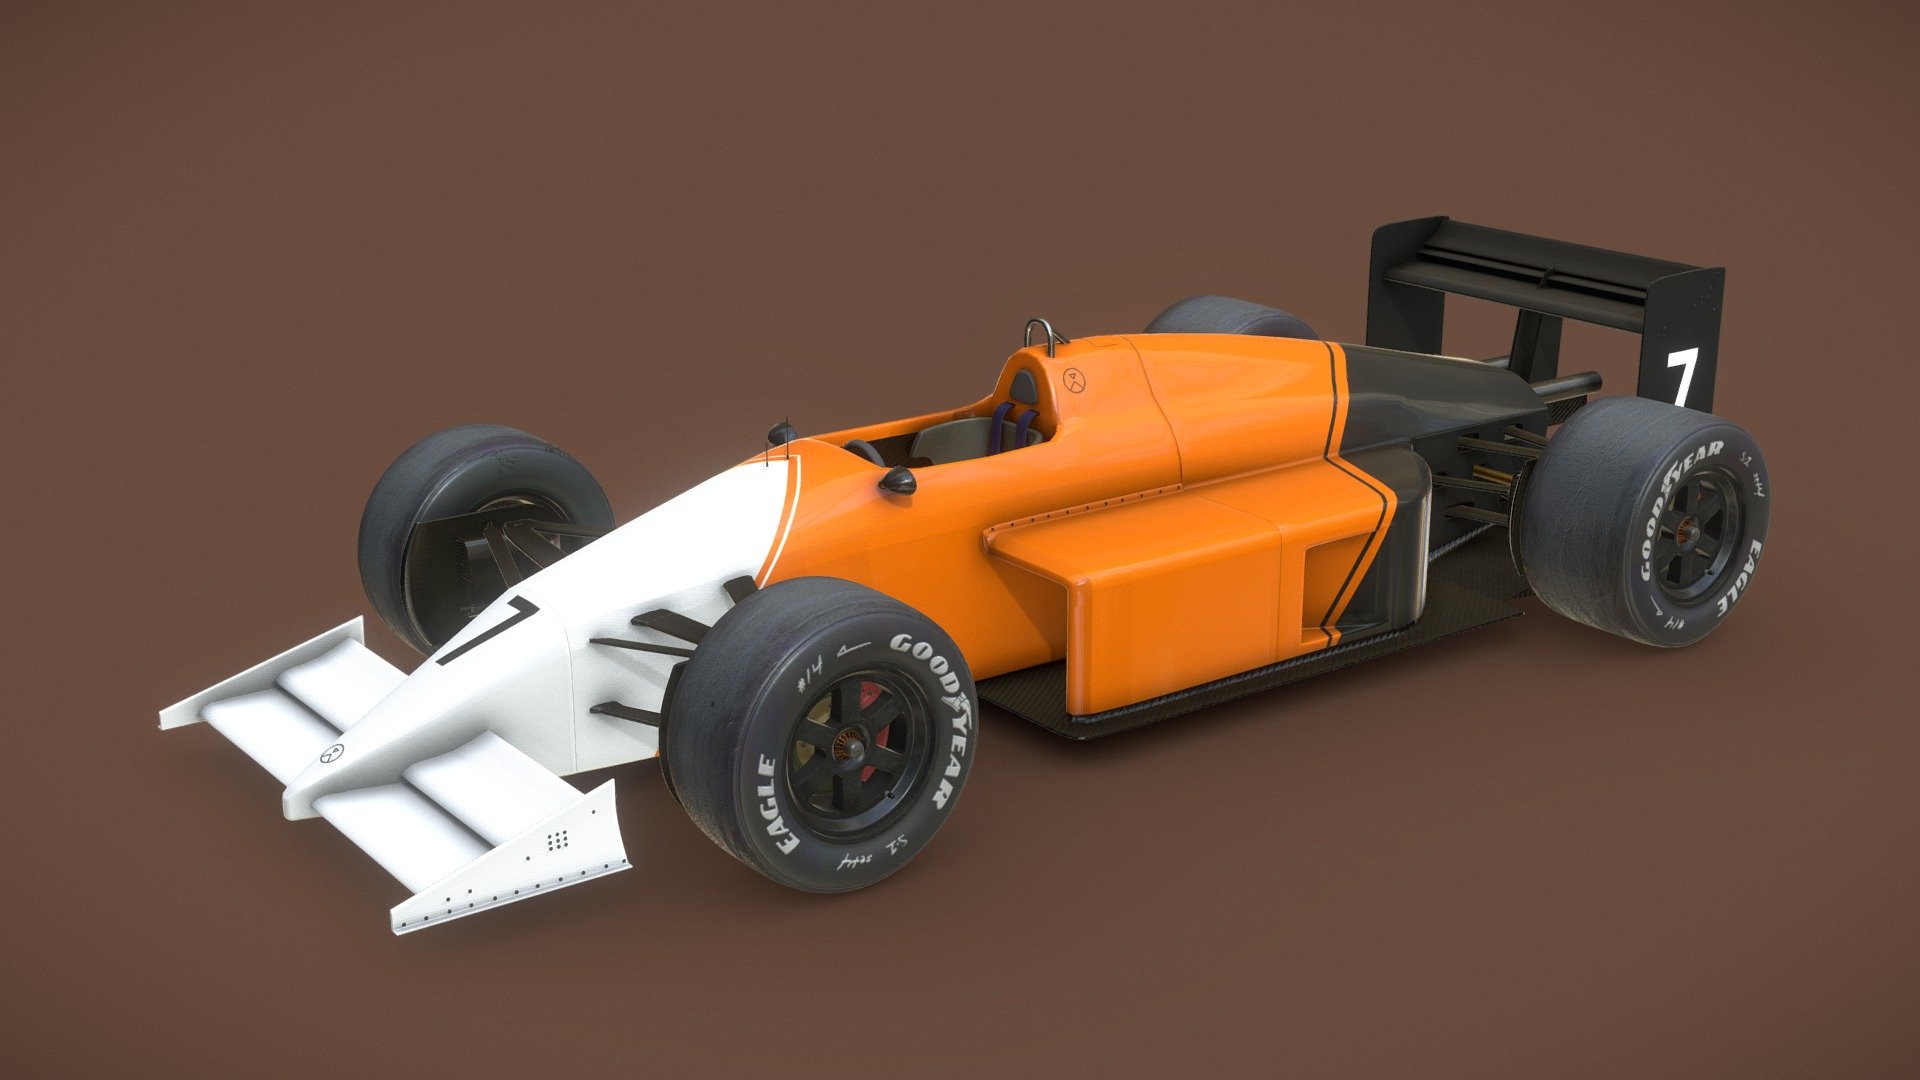 F1 Generic Racecar based on the designs from the early 1980s 3d model